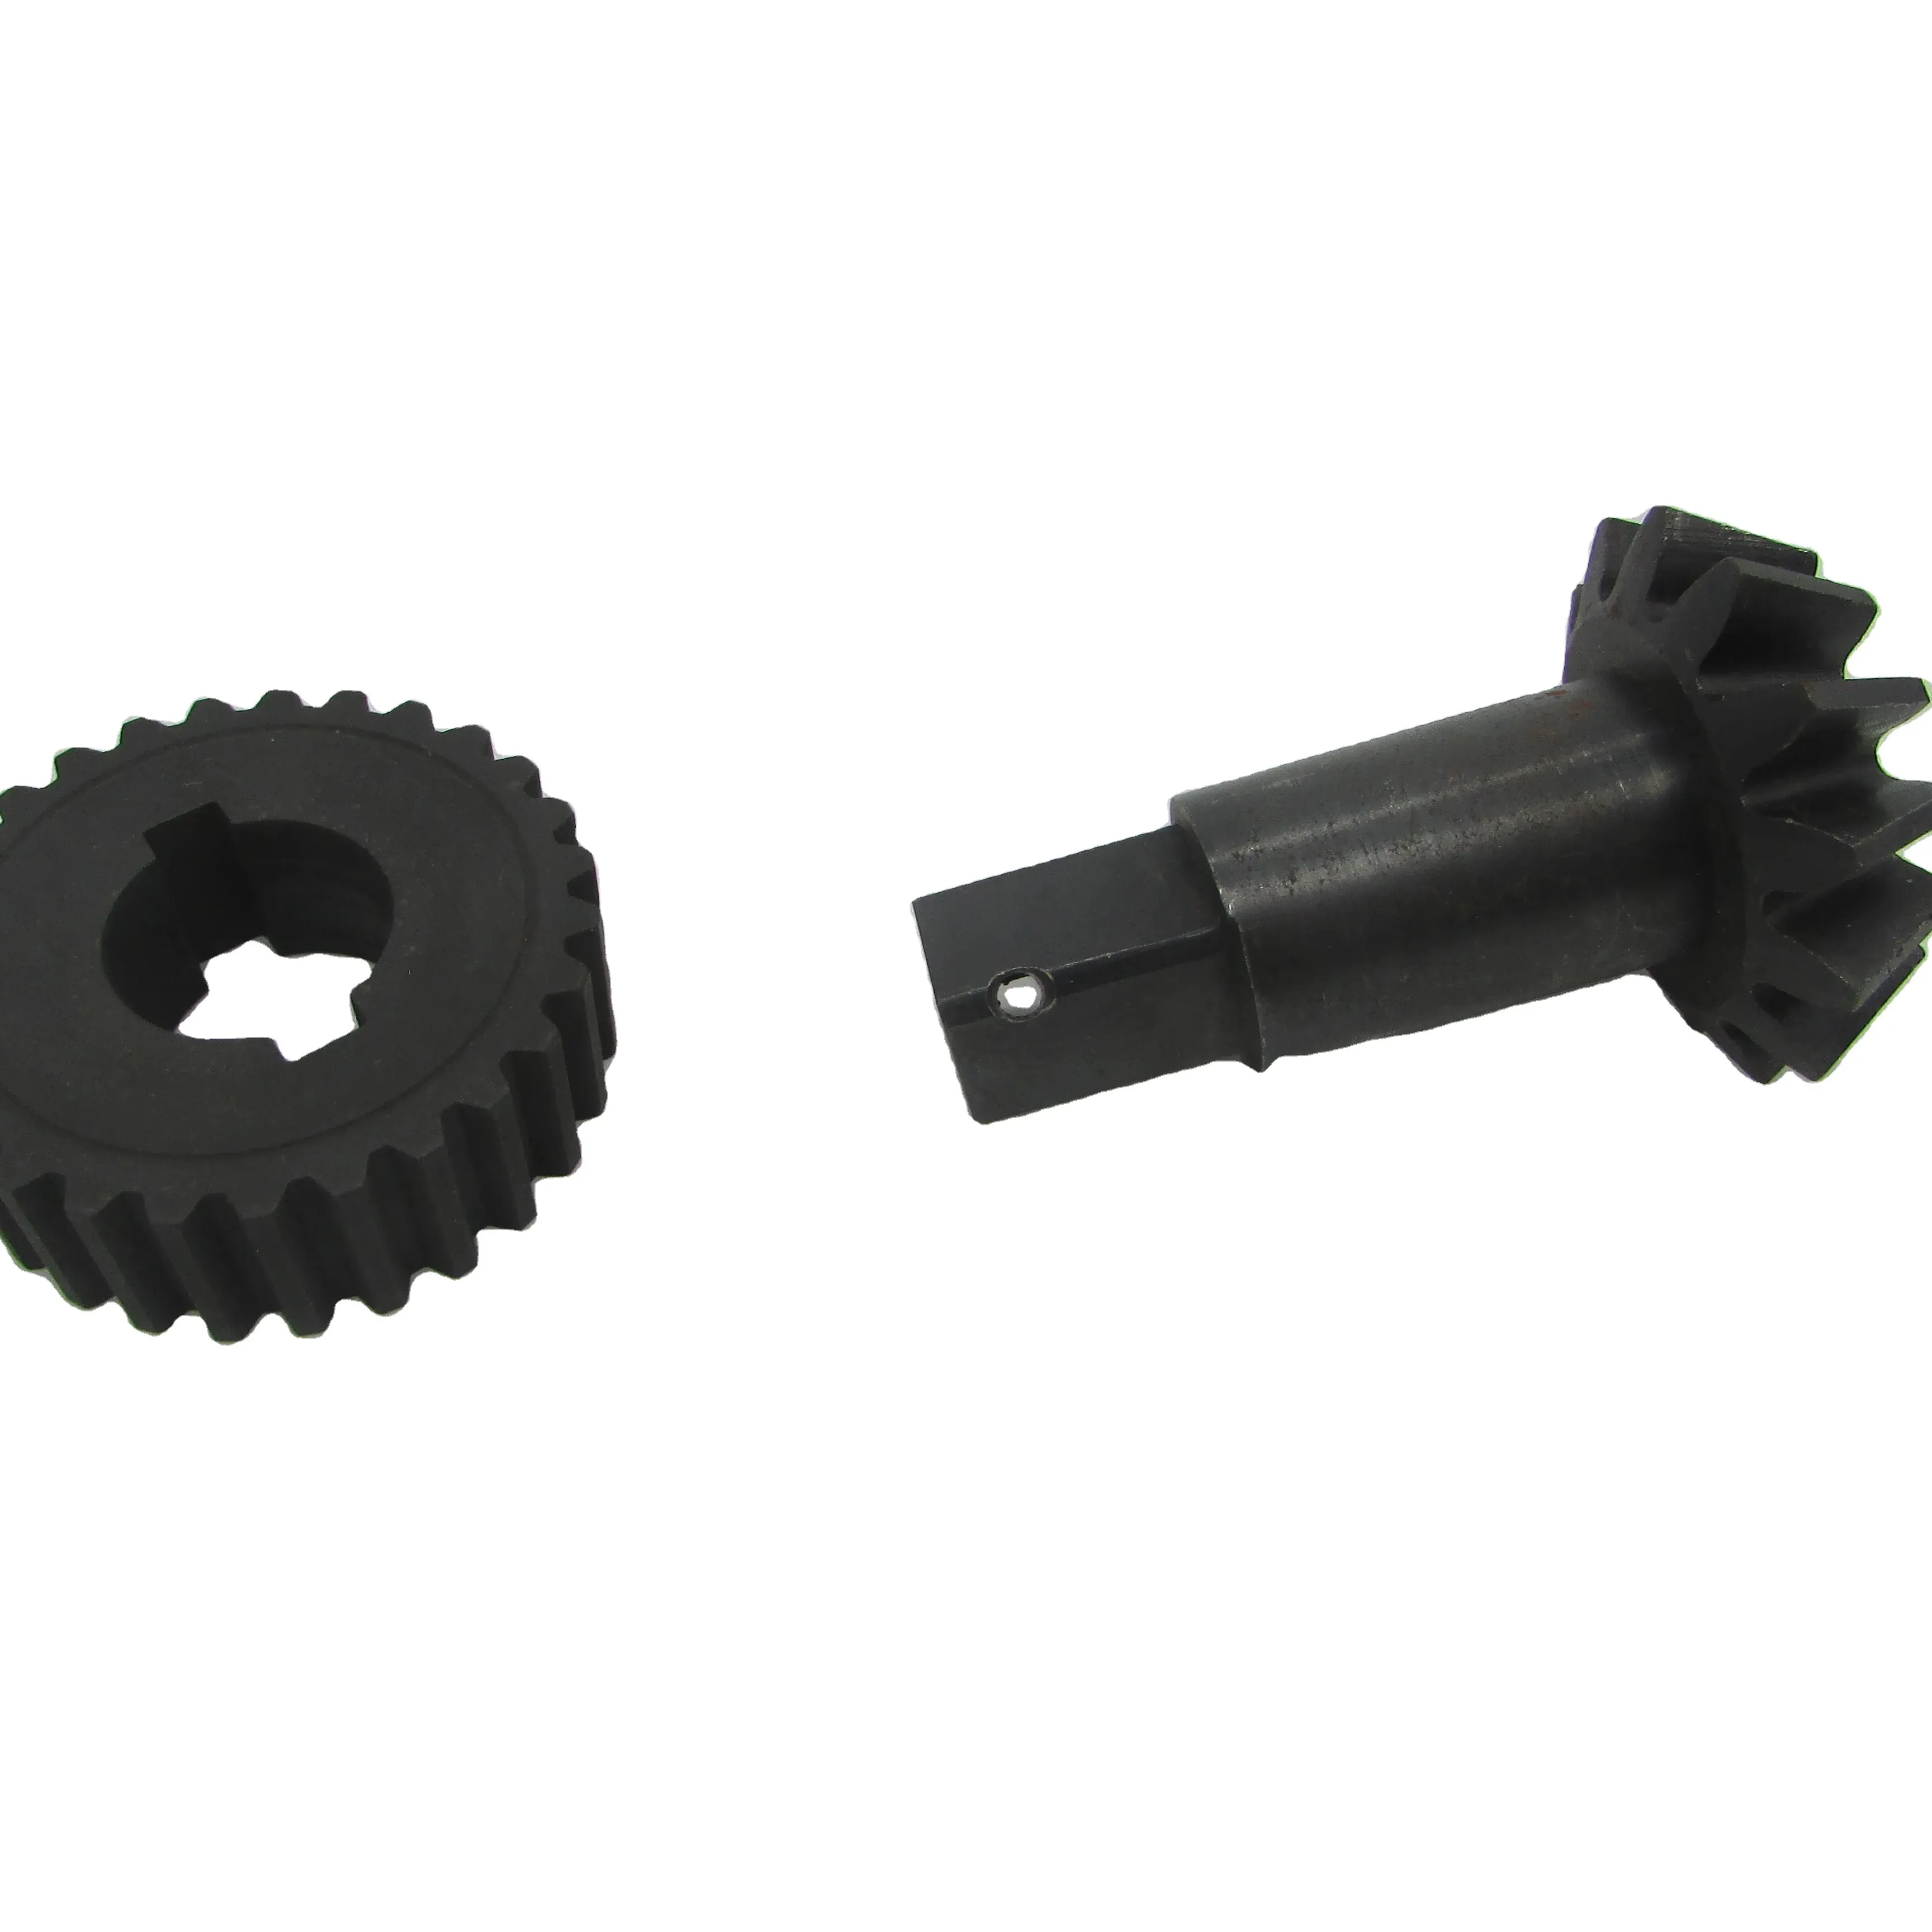 RTS Helical Spur Gears Durable and Reliable Gear System for Industrial and Automotive Use